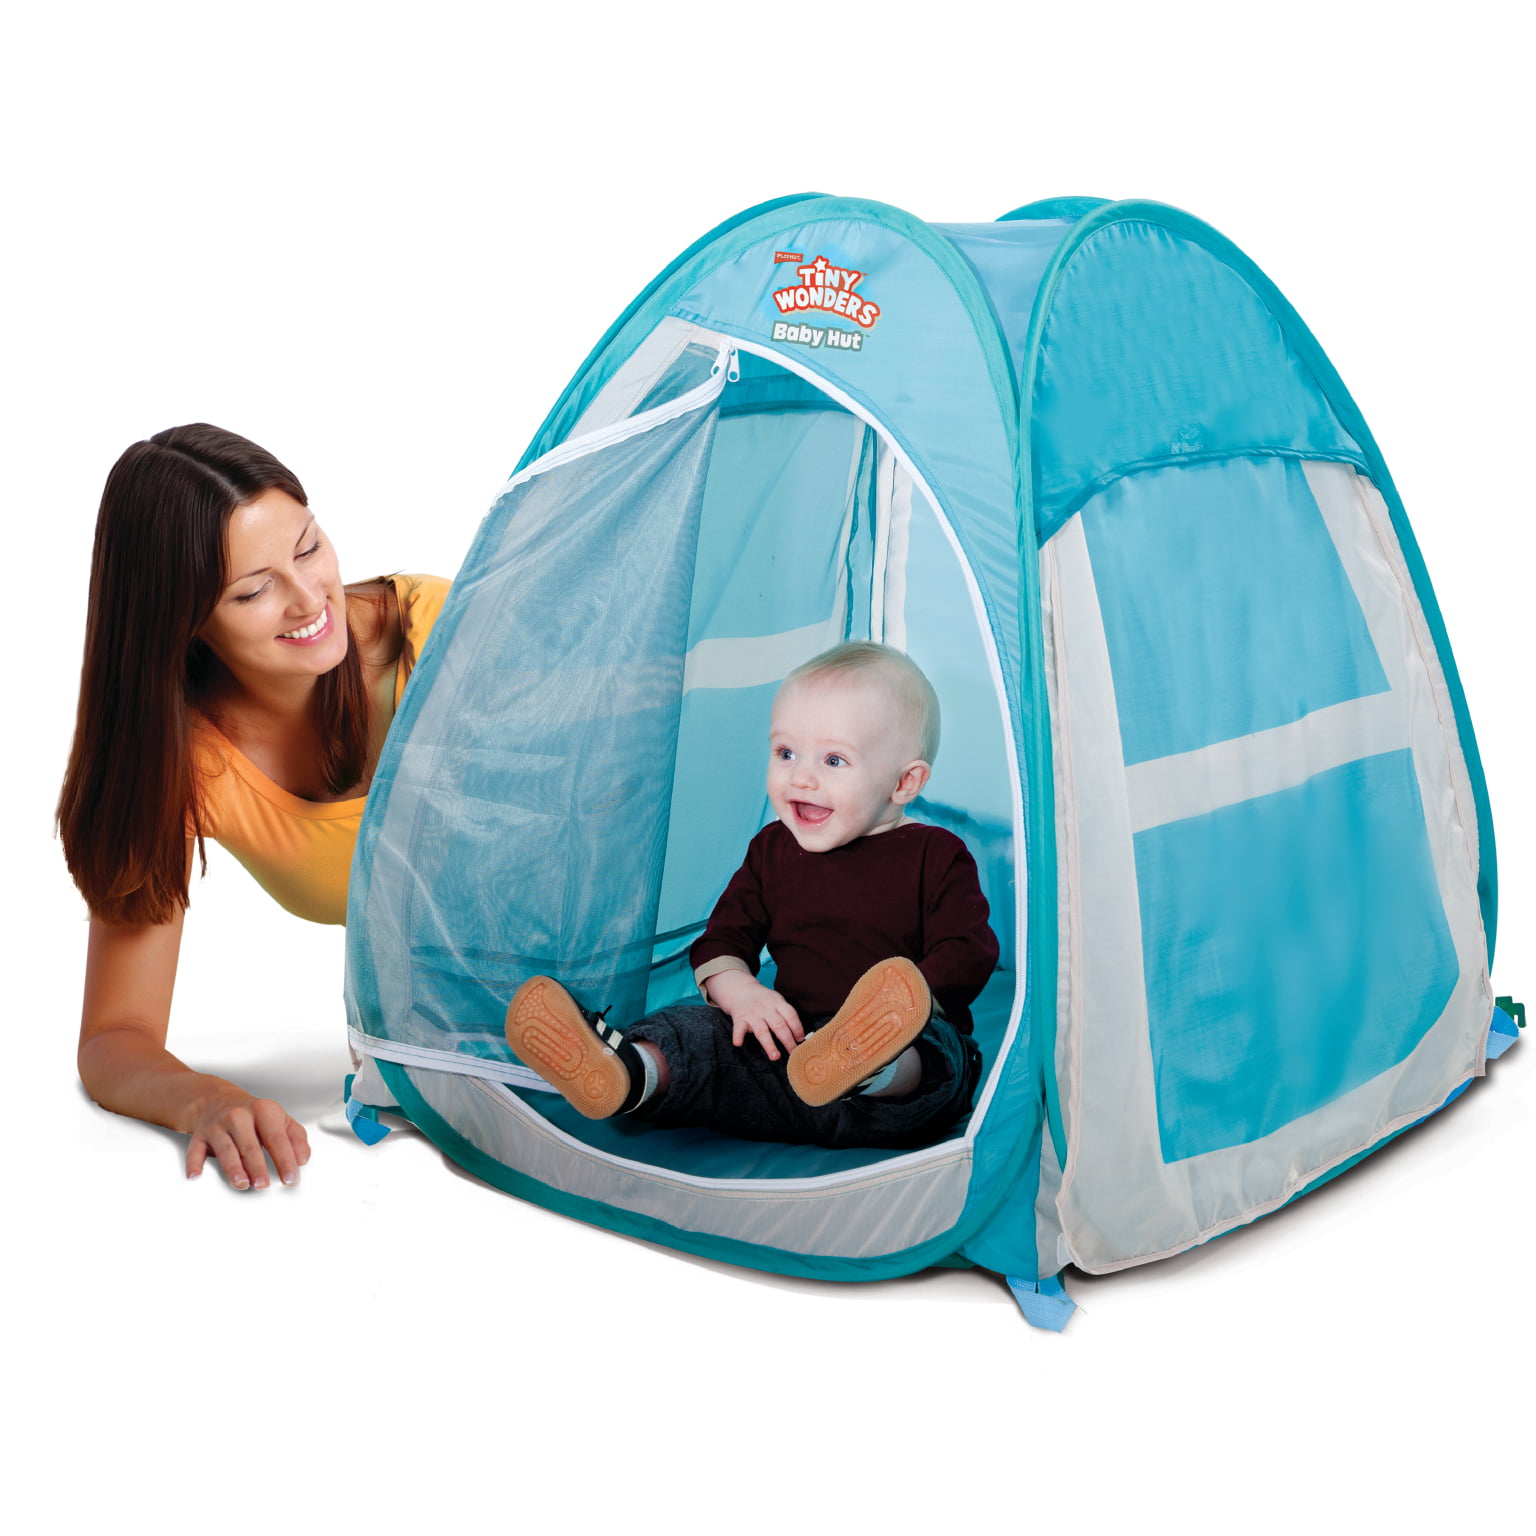 playhut tent and tunnel walmart